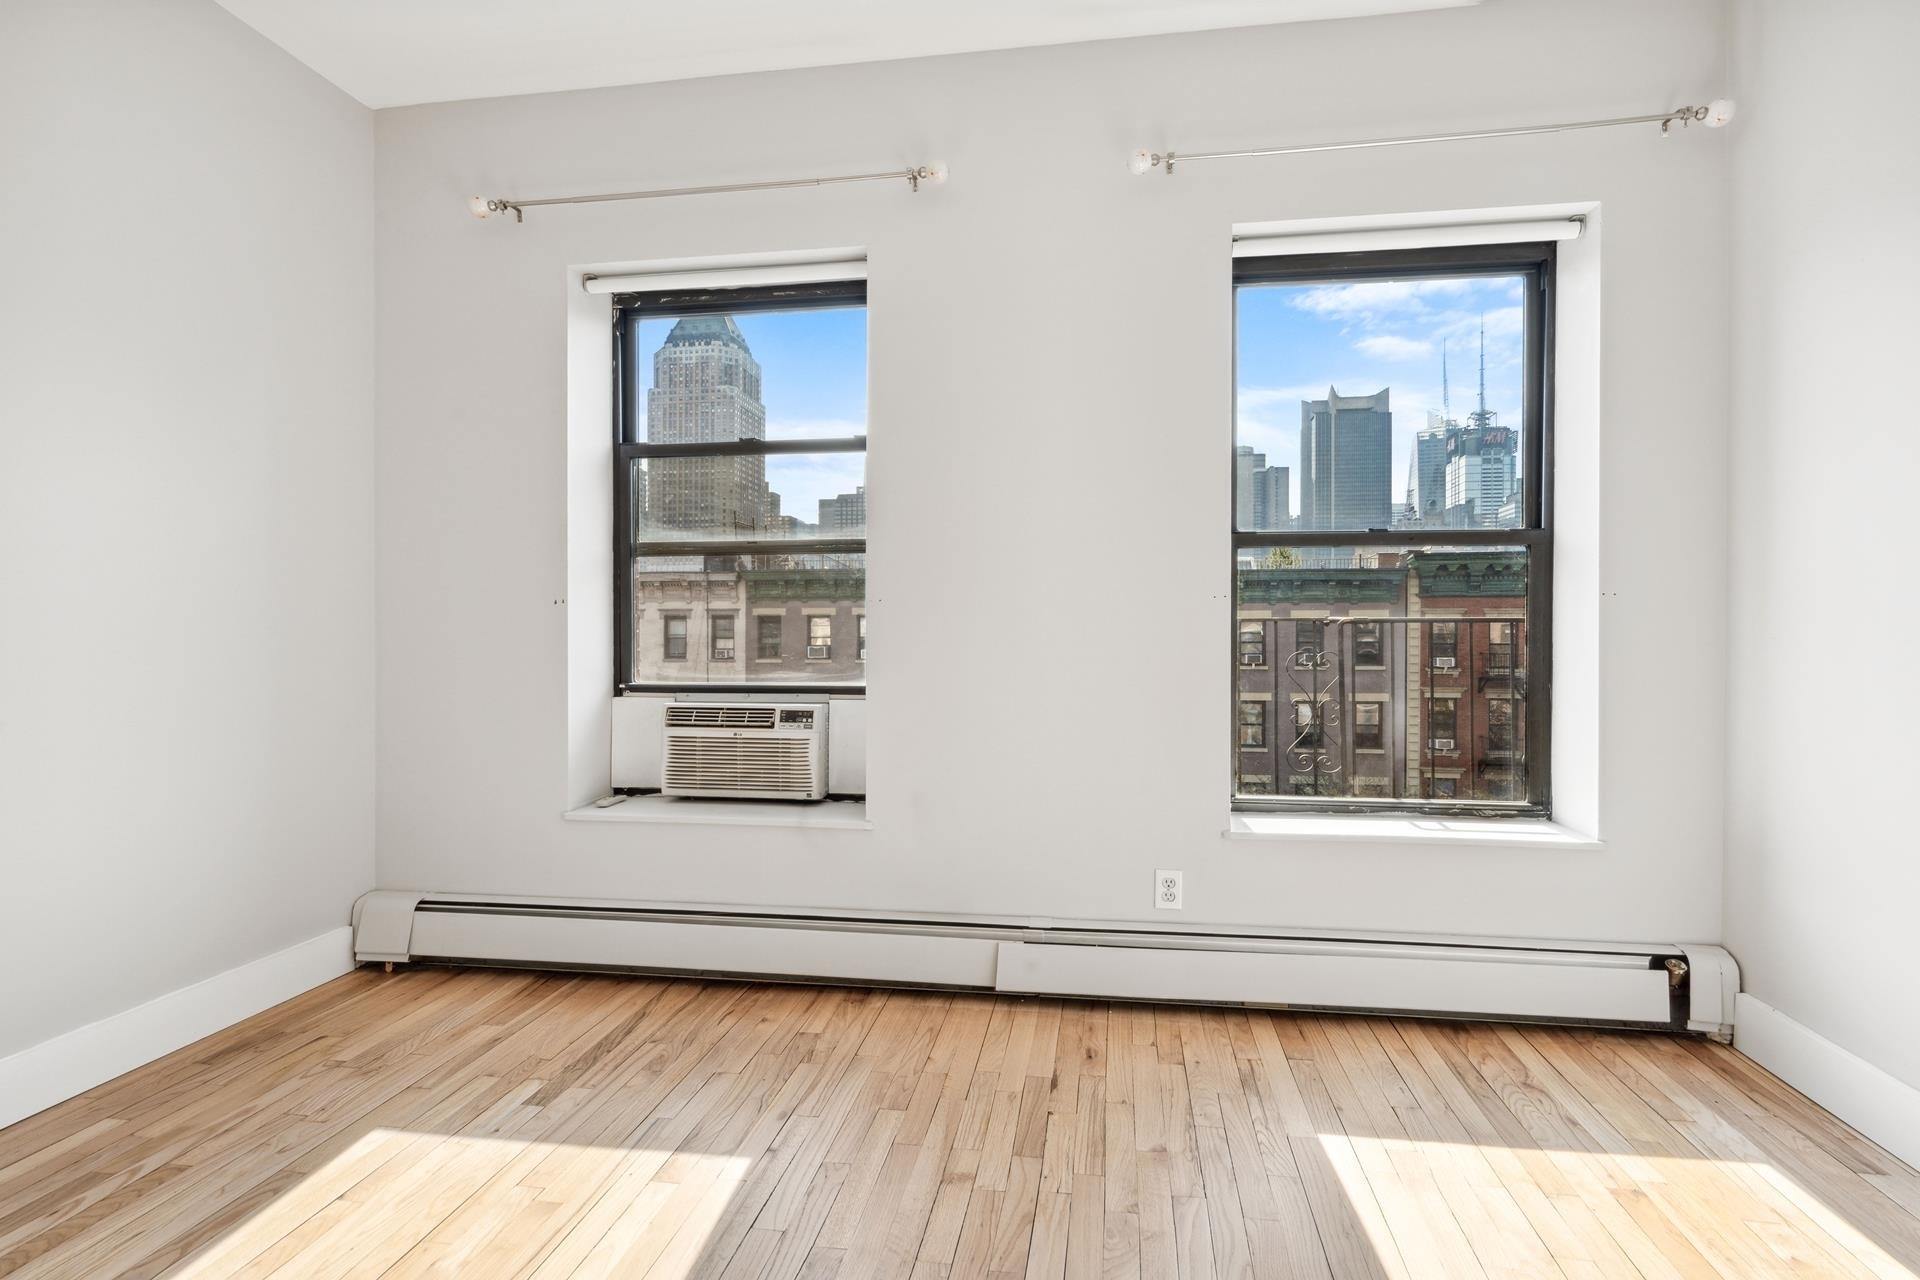 9. Co-op Properties for Sale at 661 TENTH AVE, 4B Hell's Kitchen, New York, NY 10036